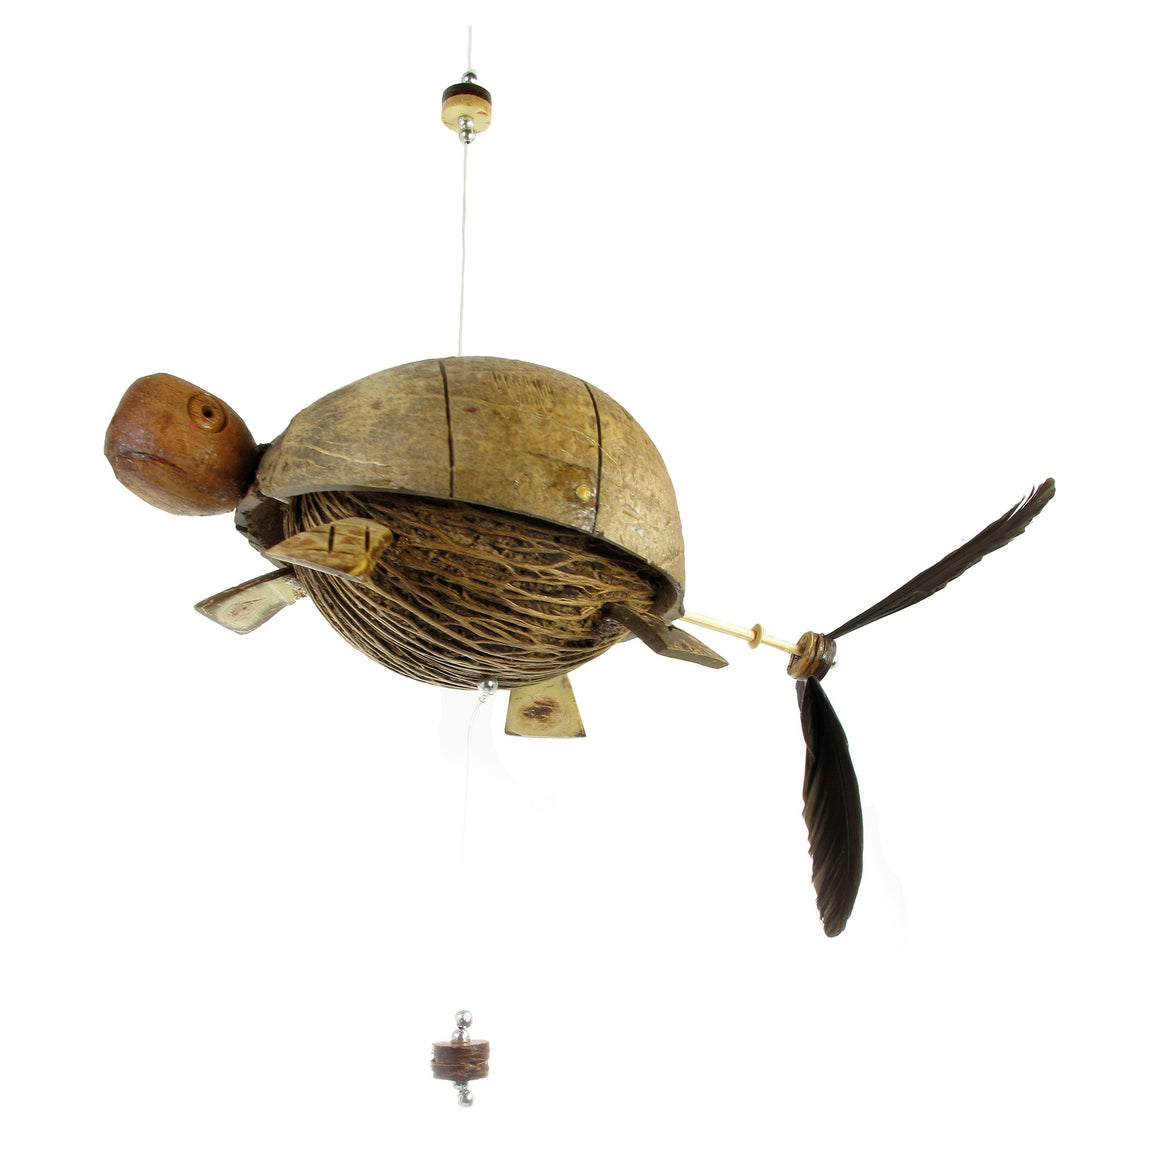 Three Sea Turtles Coconut Shell Mobile, Hanging Mobile & Hanging Décor - TropicaZona